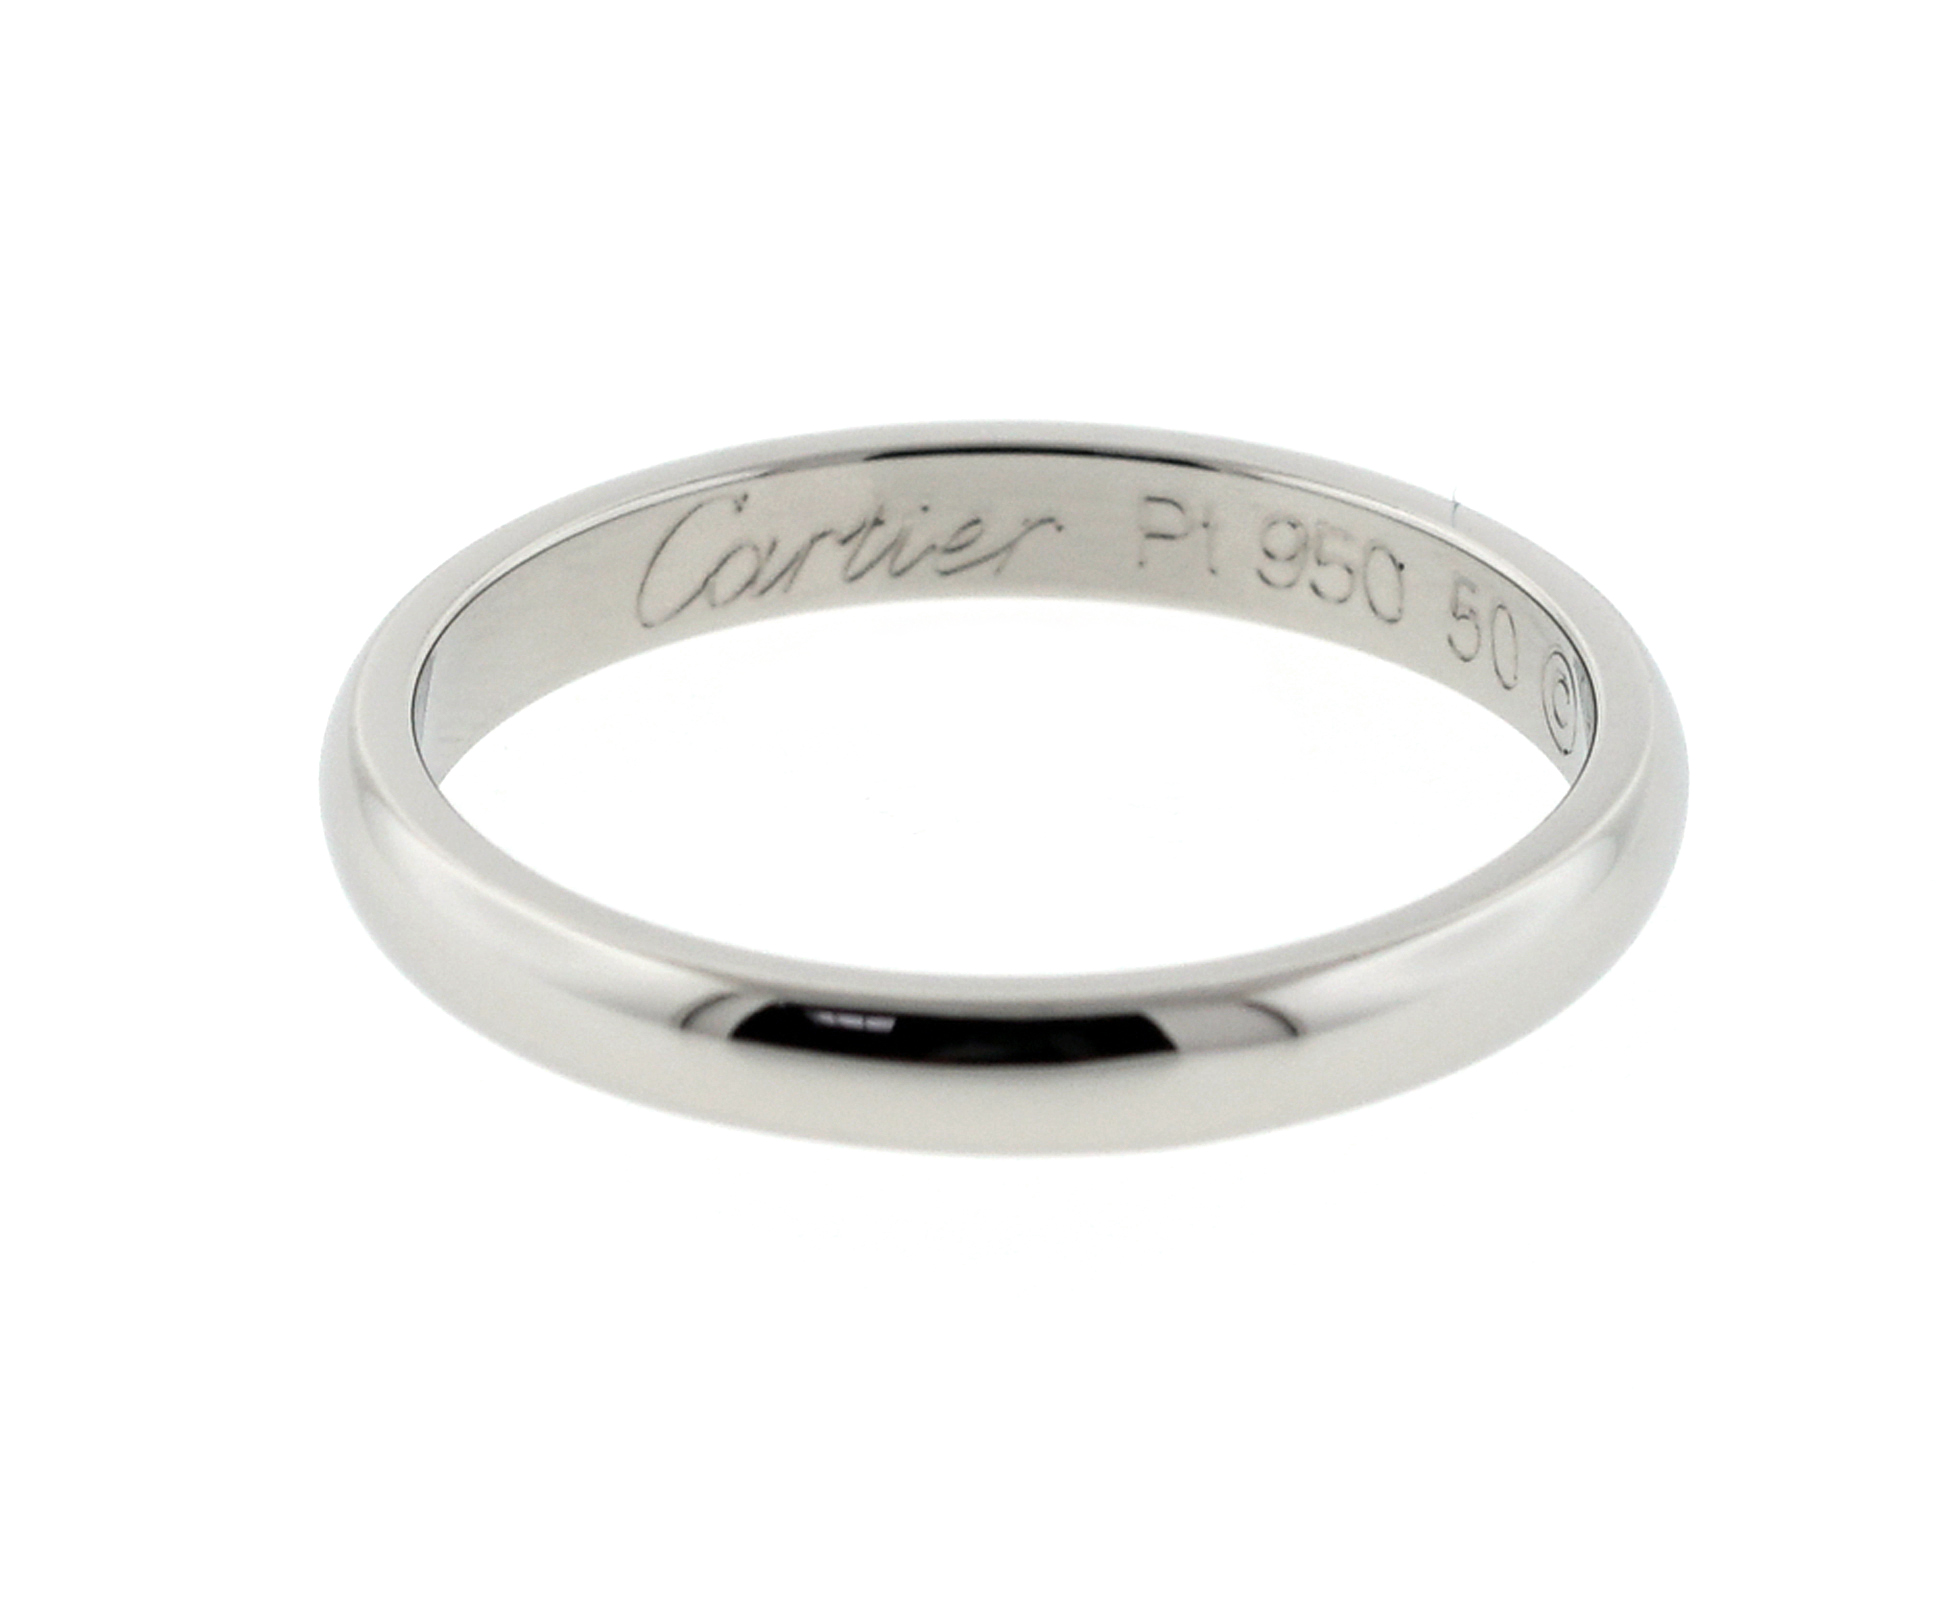 Cartier Classic Wedding Band in Platinum | New York Jewelers Chicago